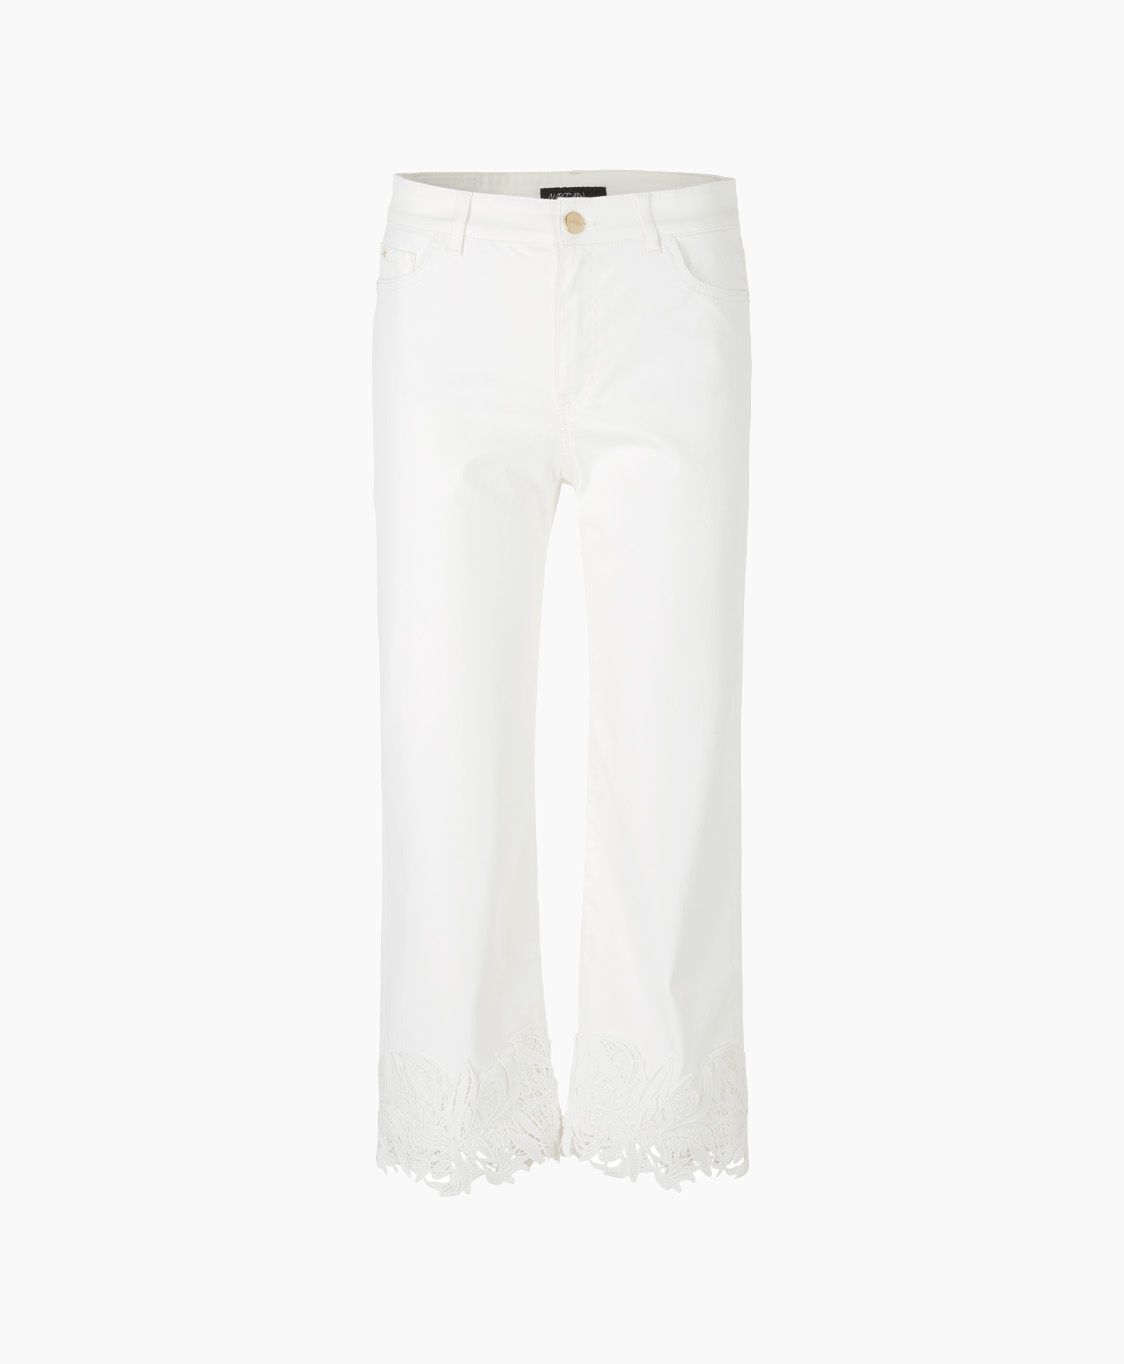 Marccain Collectie Jeans Uc 82.06 D74 Off White